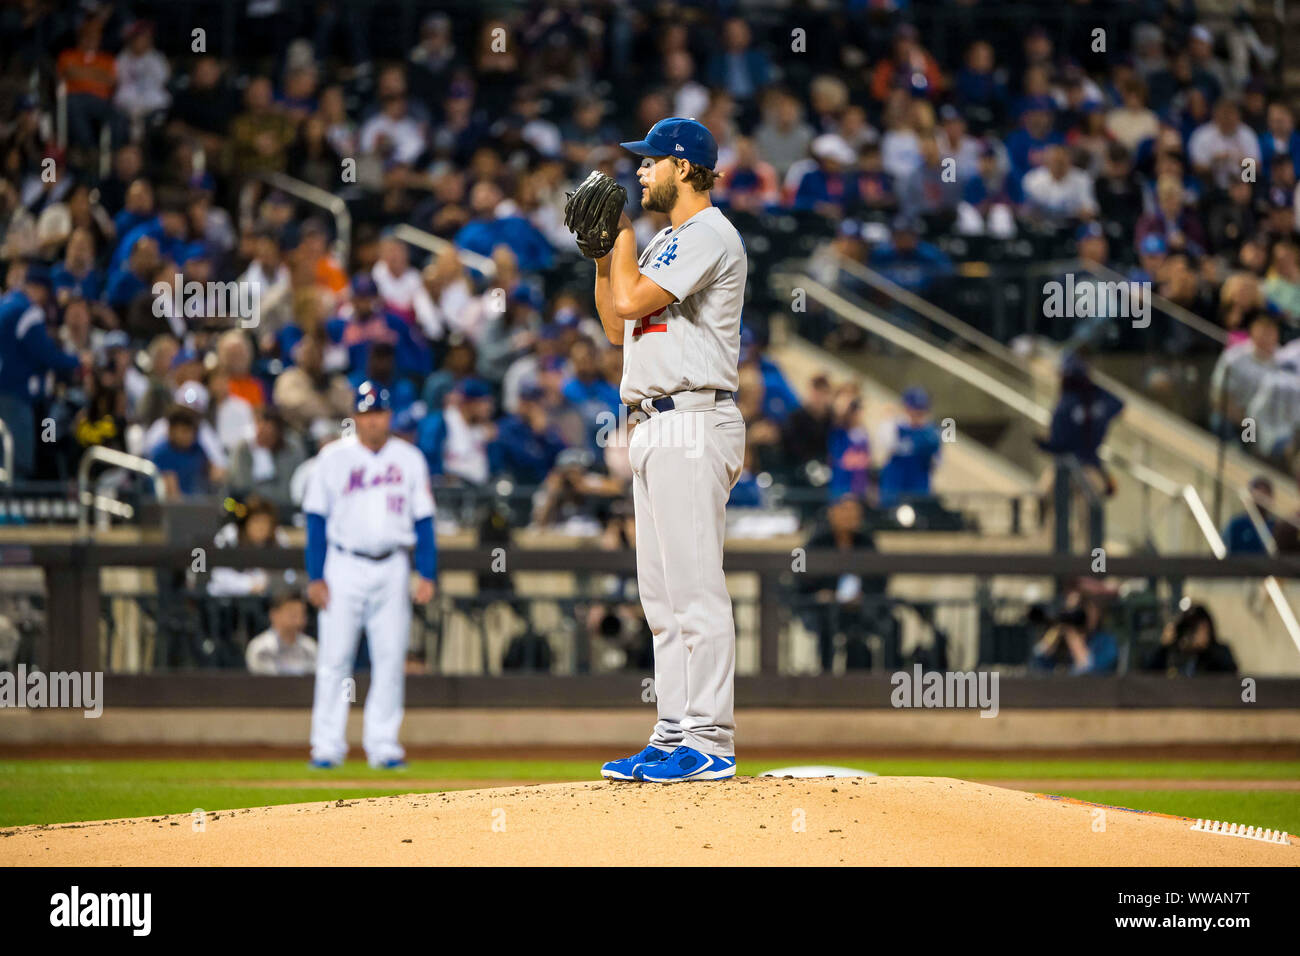 Queens, New York, USA. 13th Sep, 2019. Los Angeles Dodgers starting pitcher Clayton Kershaw (22) stands on the mound during the game between The New York Mets and The Los Angeles Dodgers at Citi Field in Queens, New York. Mandatory credit: Kostas Lymperopoulos/CSM/Alamy Live News Stock Photo